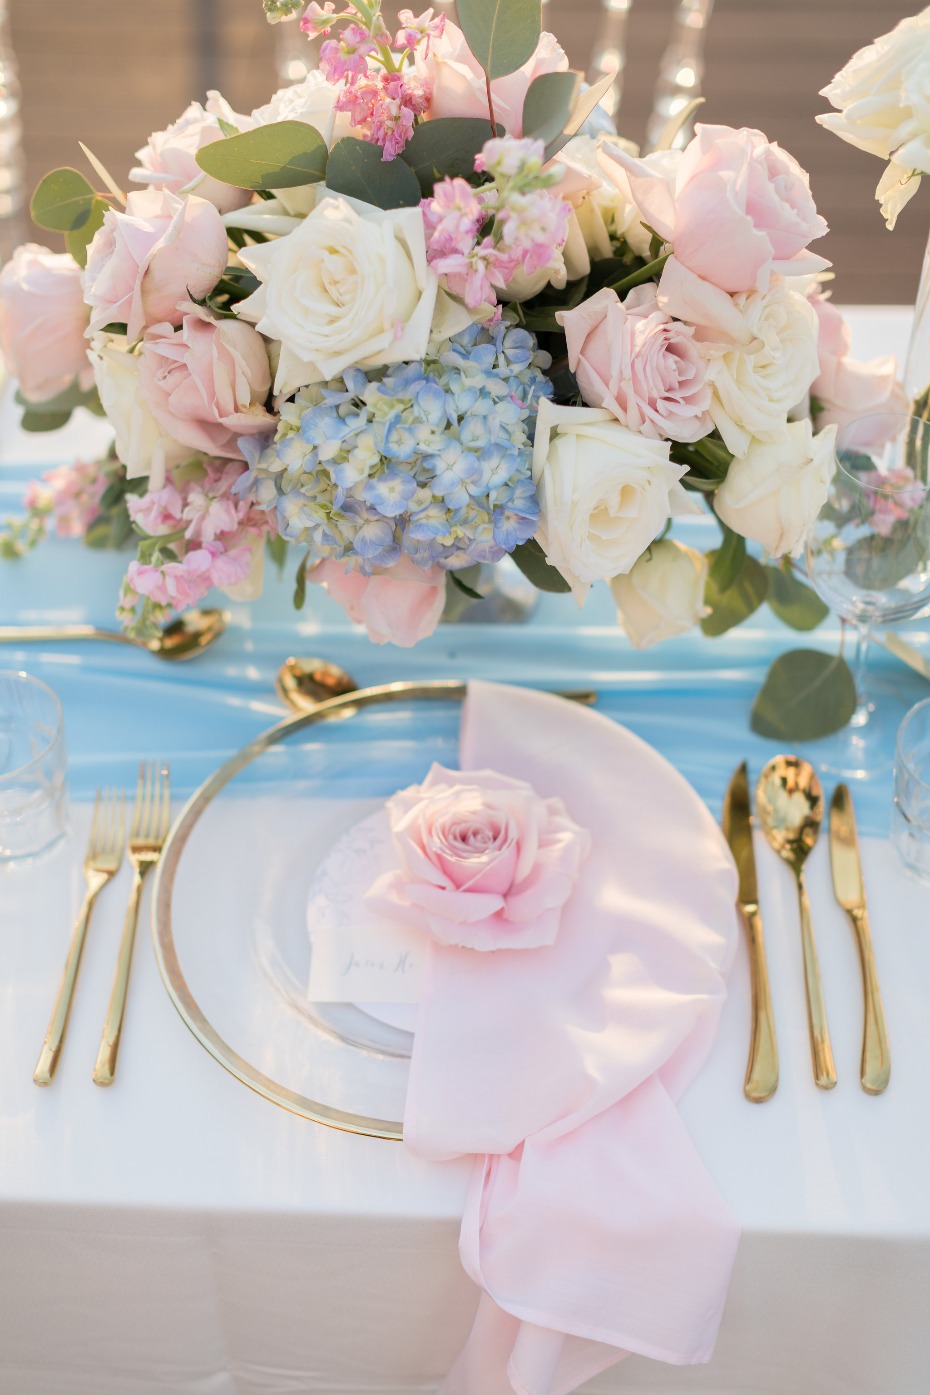 Glam pink and blue reception